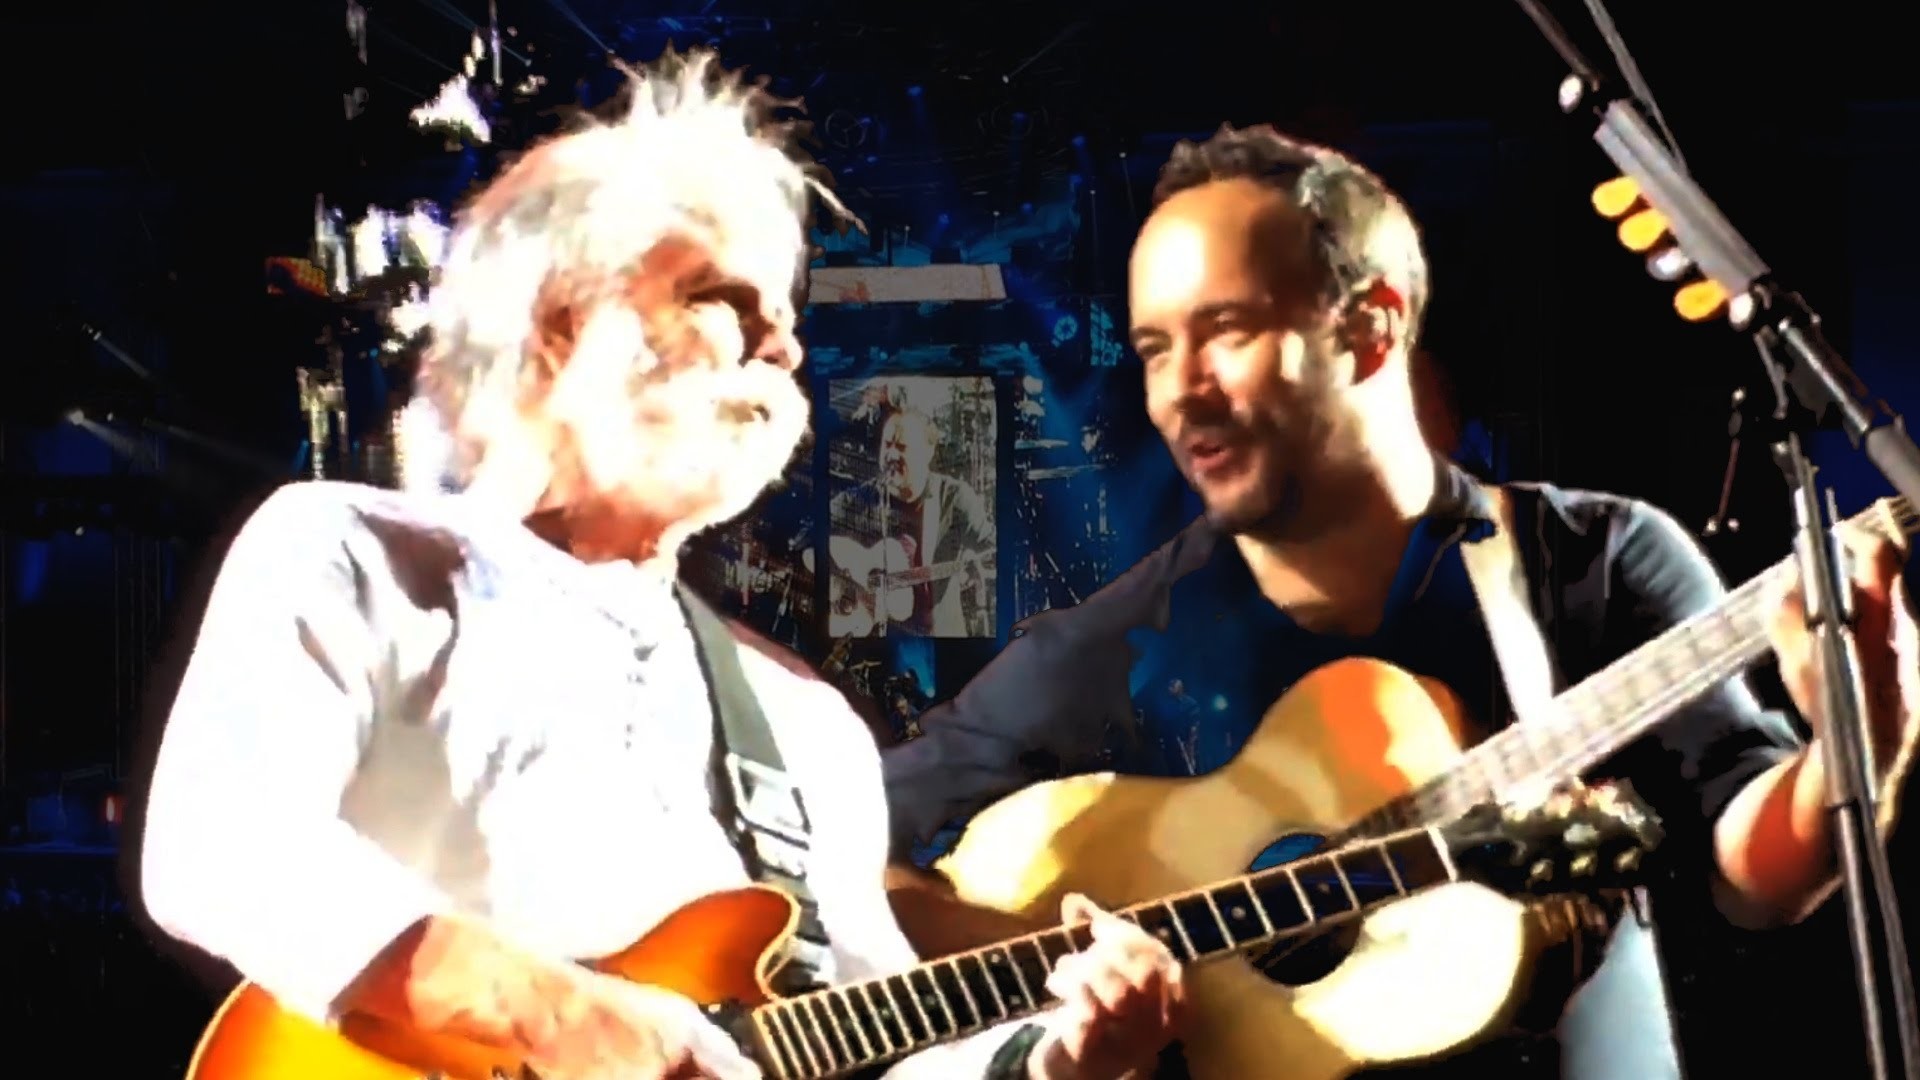 1920x1080 UPDATED: Watch Multi-cam Footage of Bob Weir's Sit In with Dave Matthews  Band "The Maker" in Berkeley - Jam Buzz